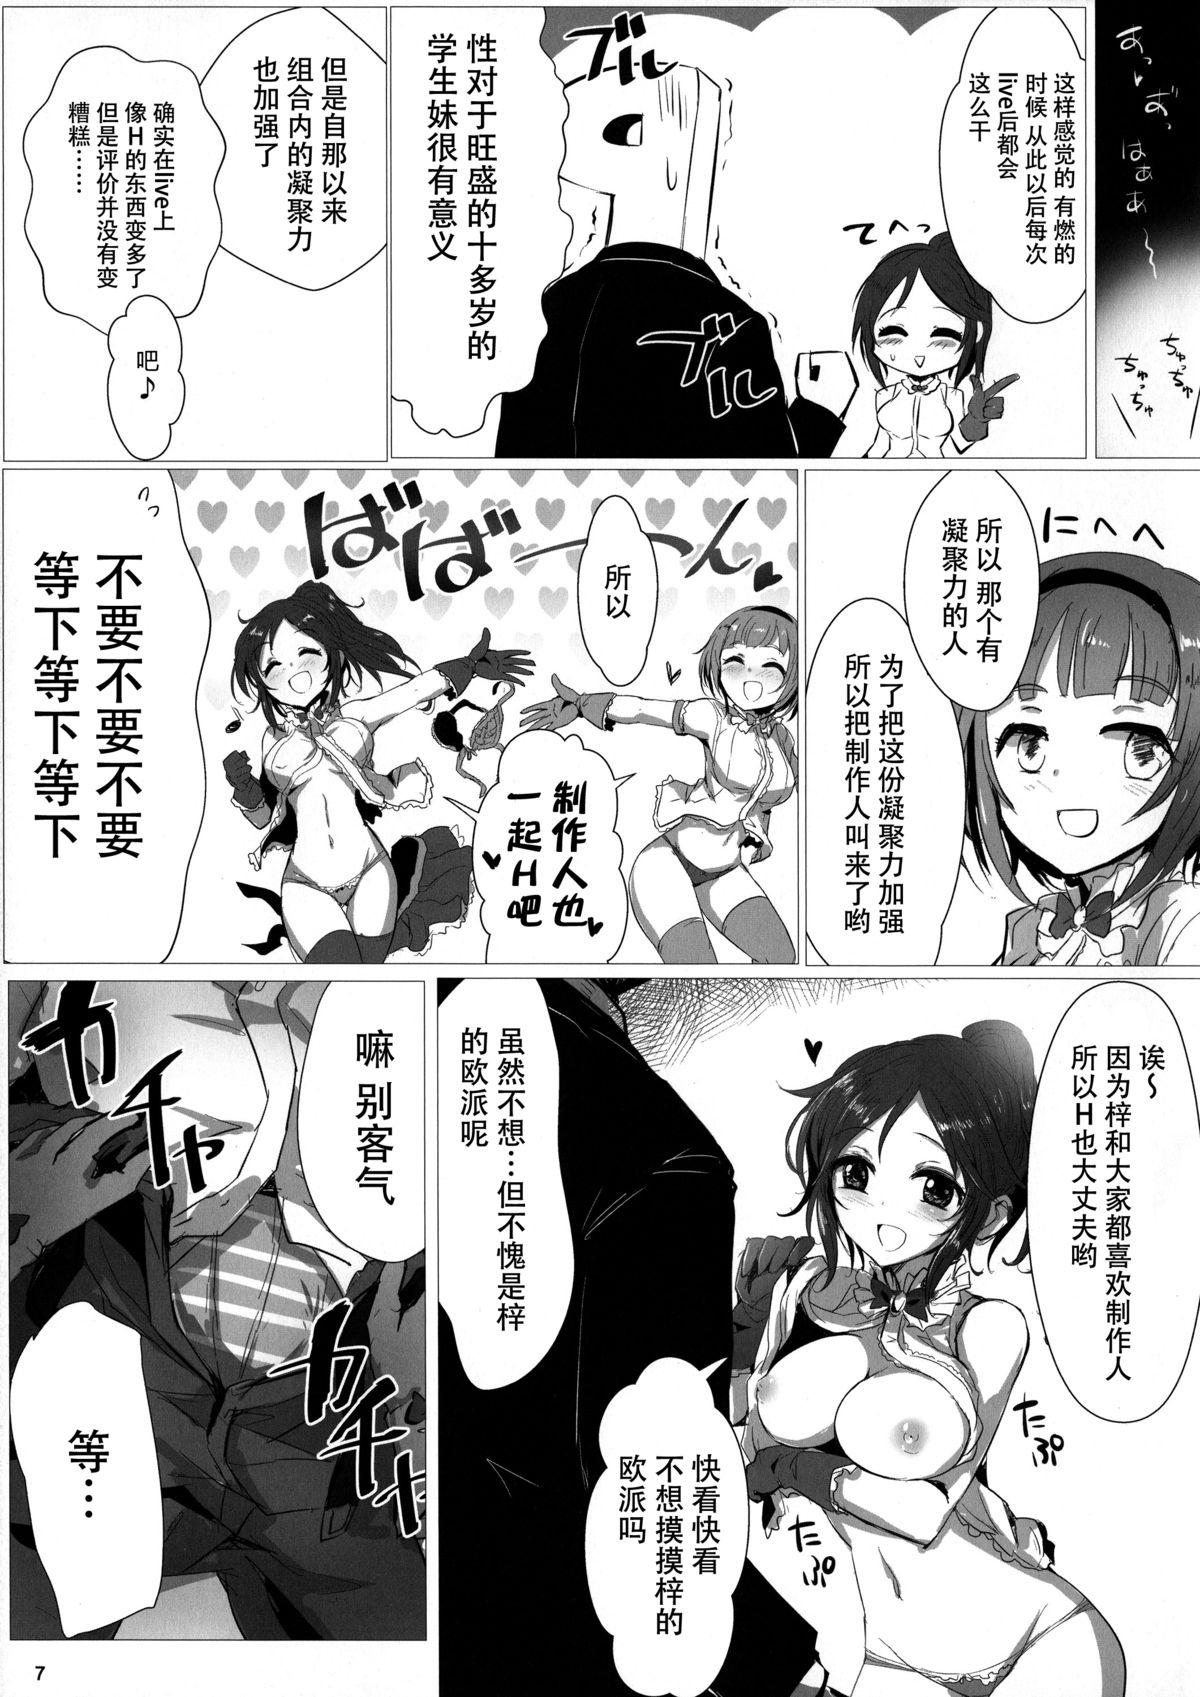 Tattoo Fril x Free - The idolmaster Gay Rimming - Page 7